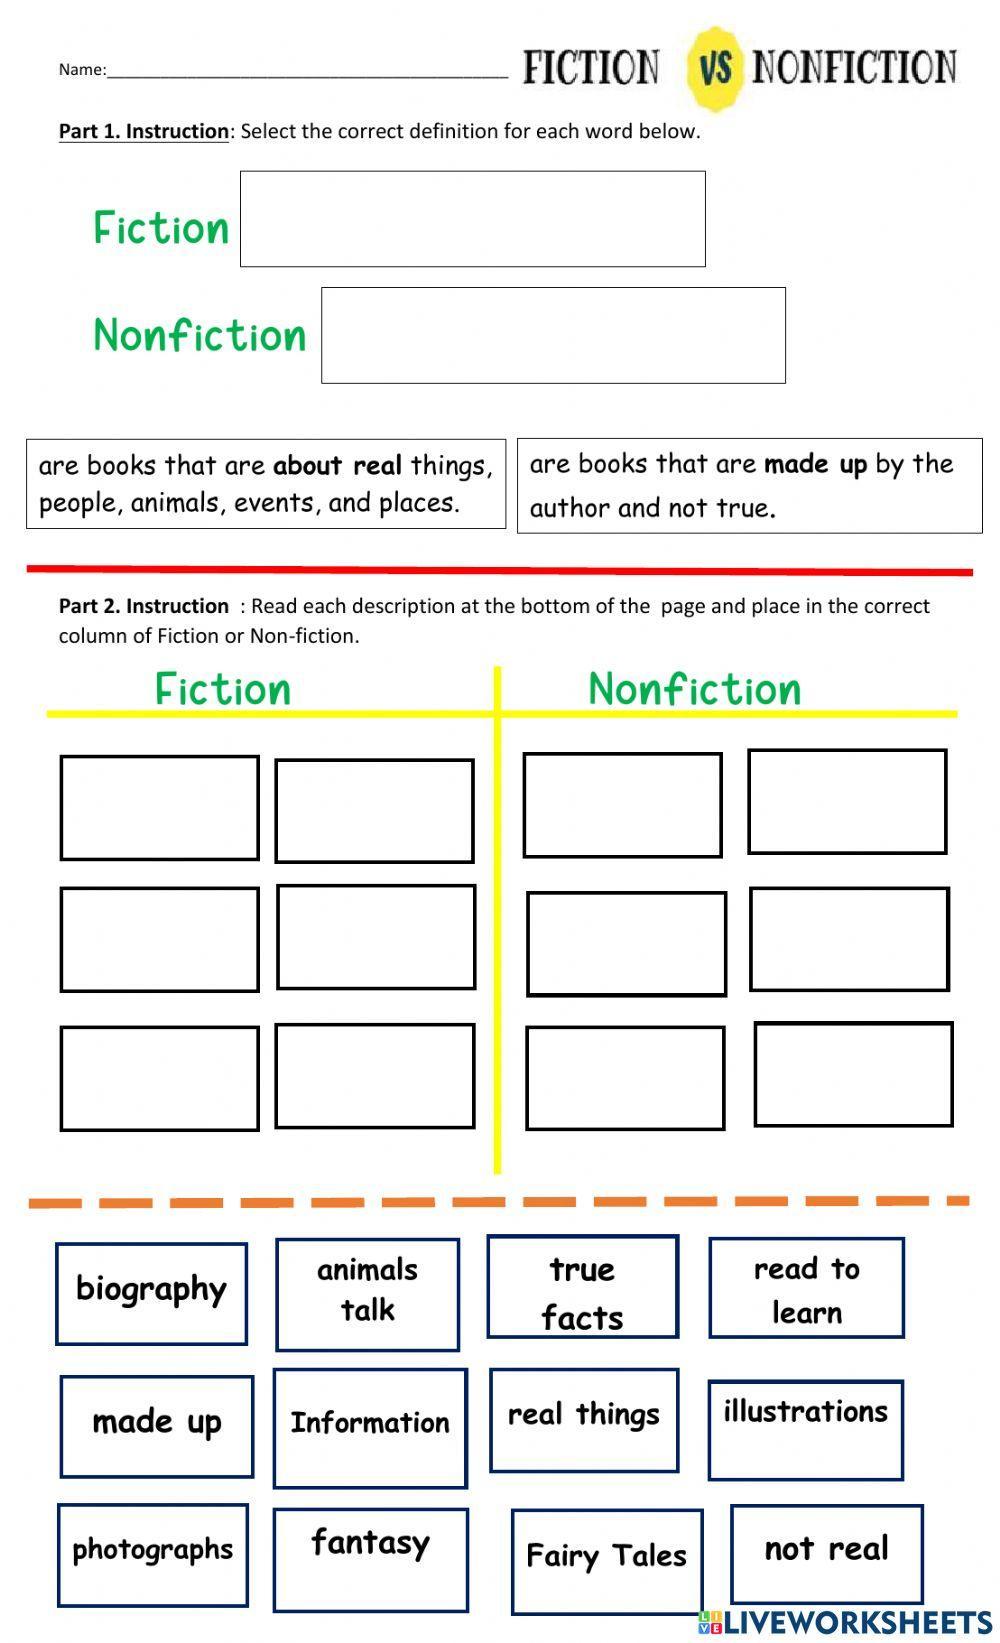 Review Fiction and Nonfiction